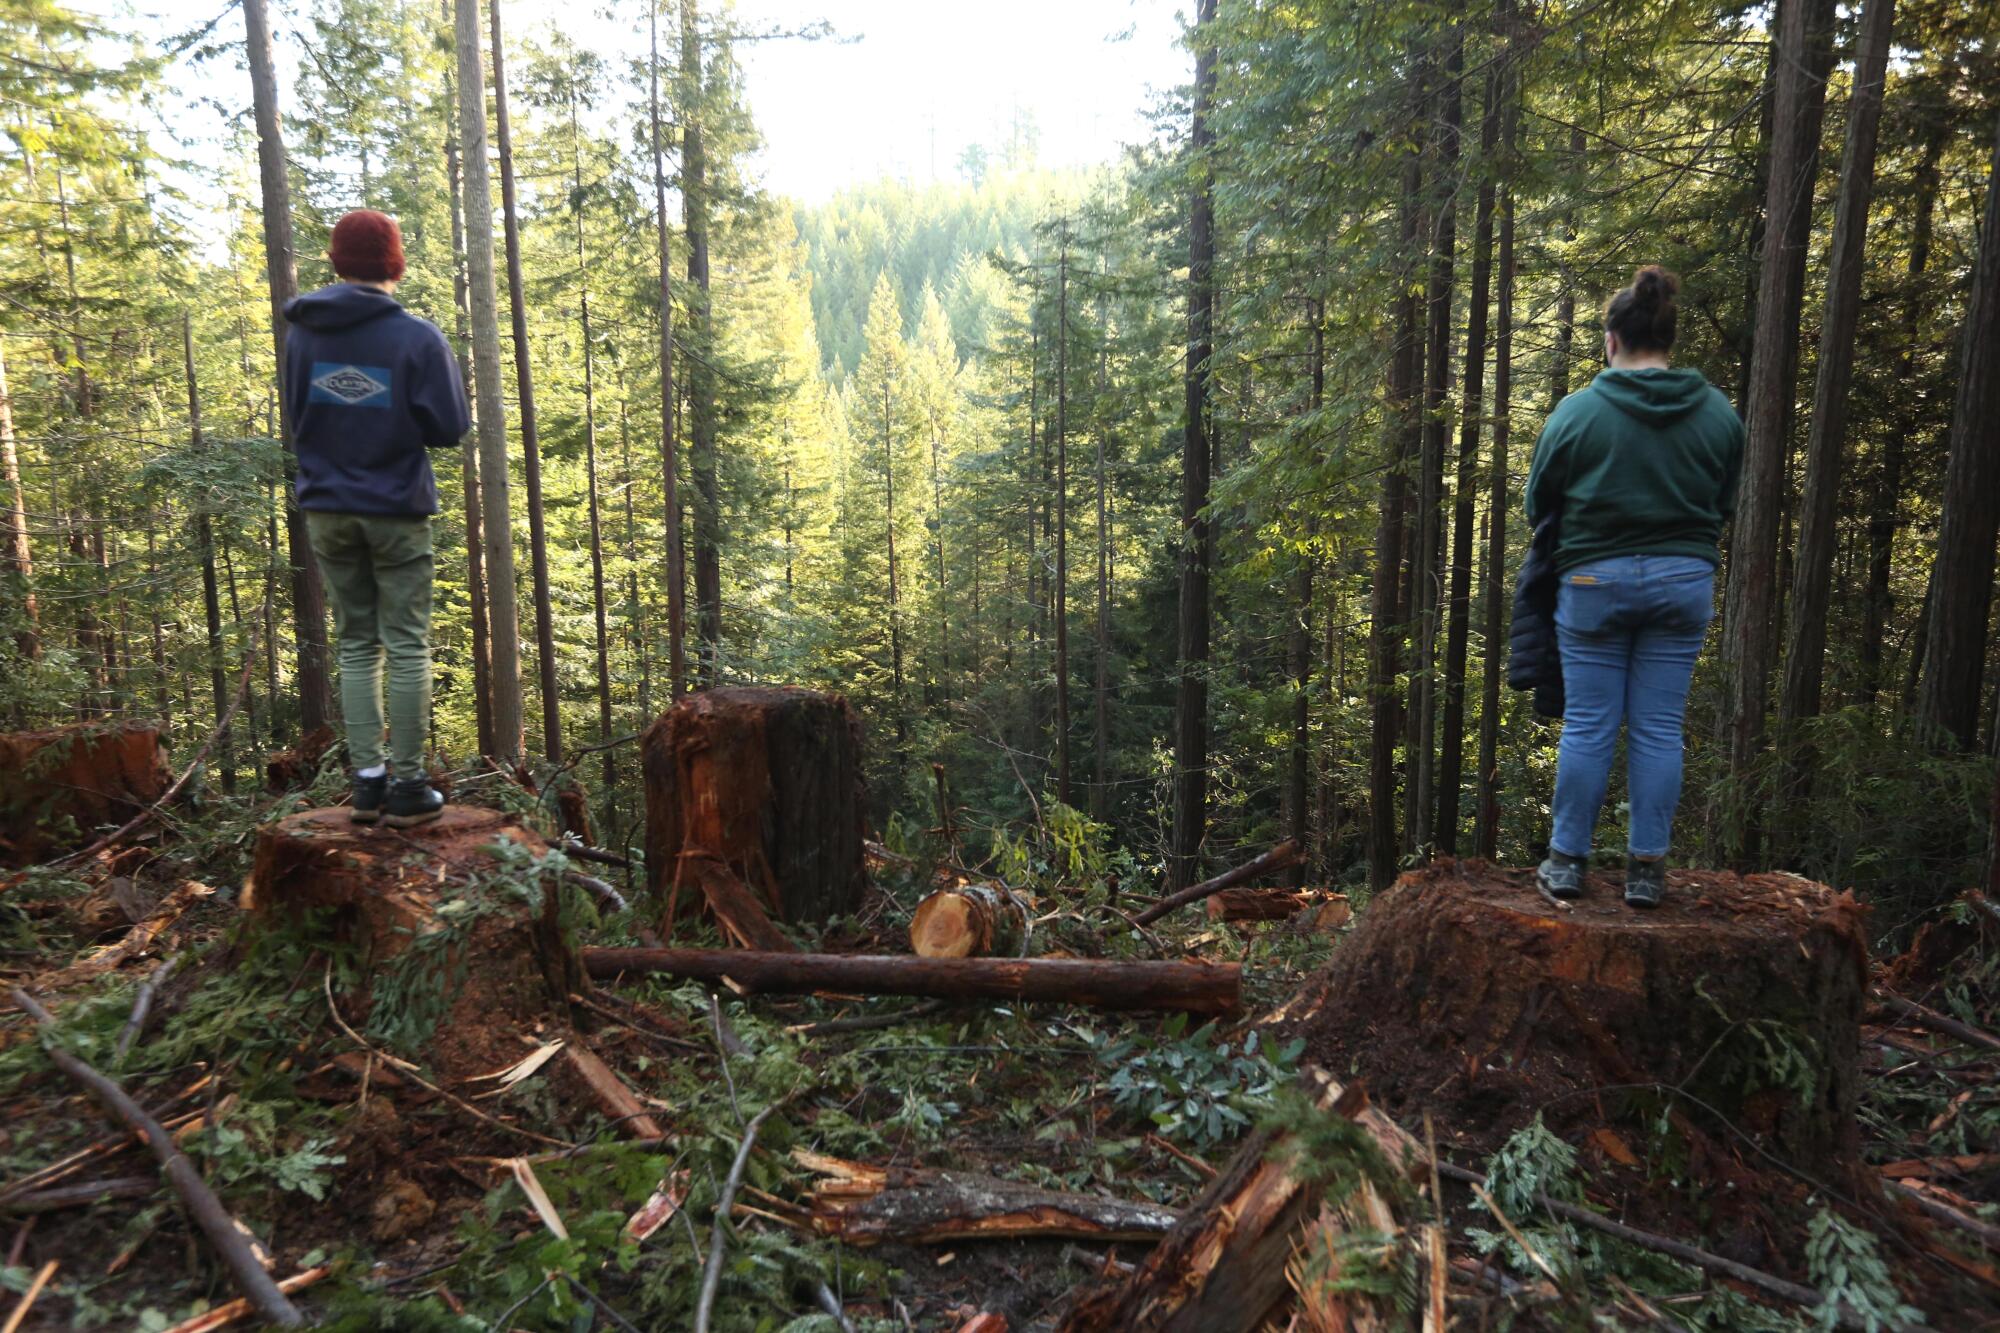 Youth activists stand on the stumps of fallen redwood trees in Jackson Demonstration State Forest